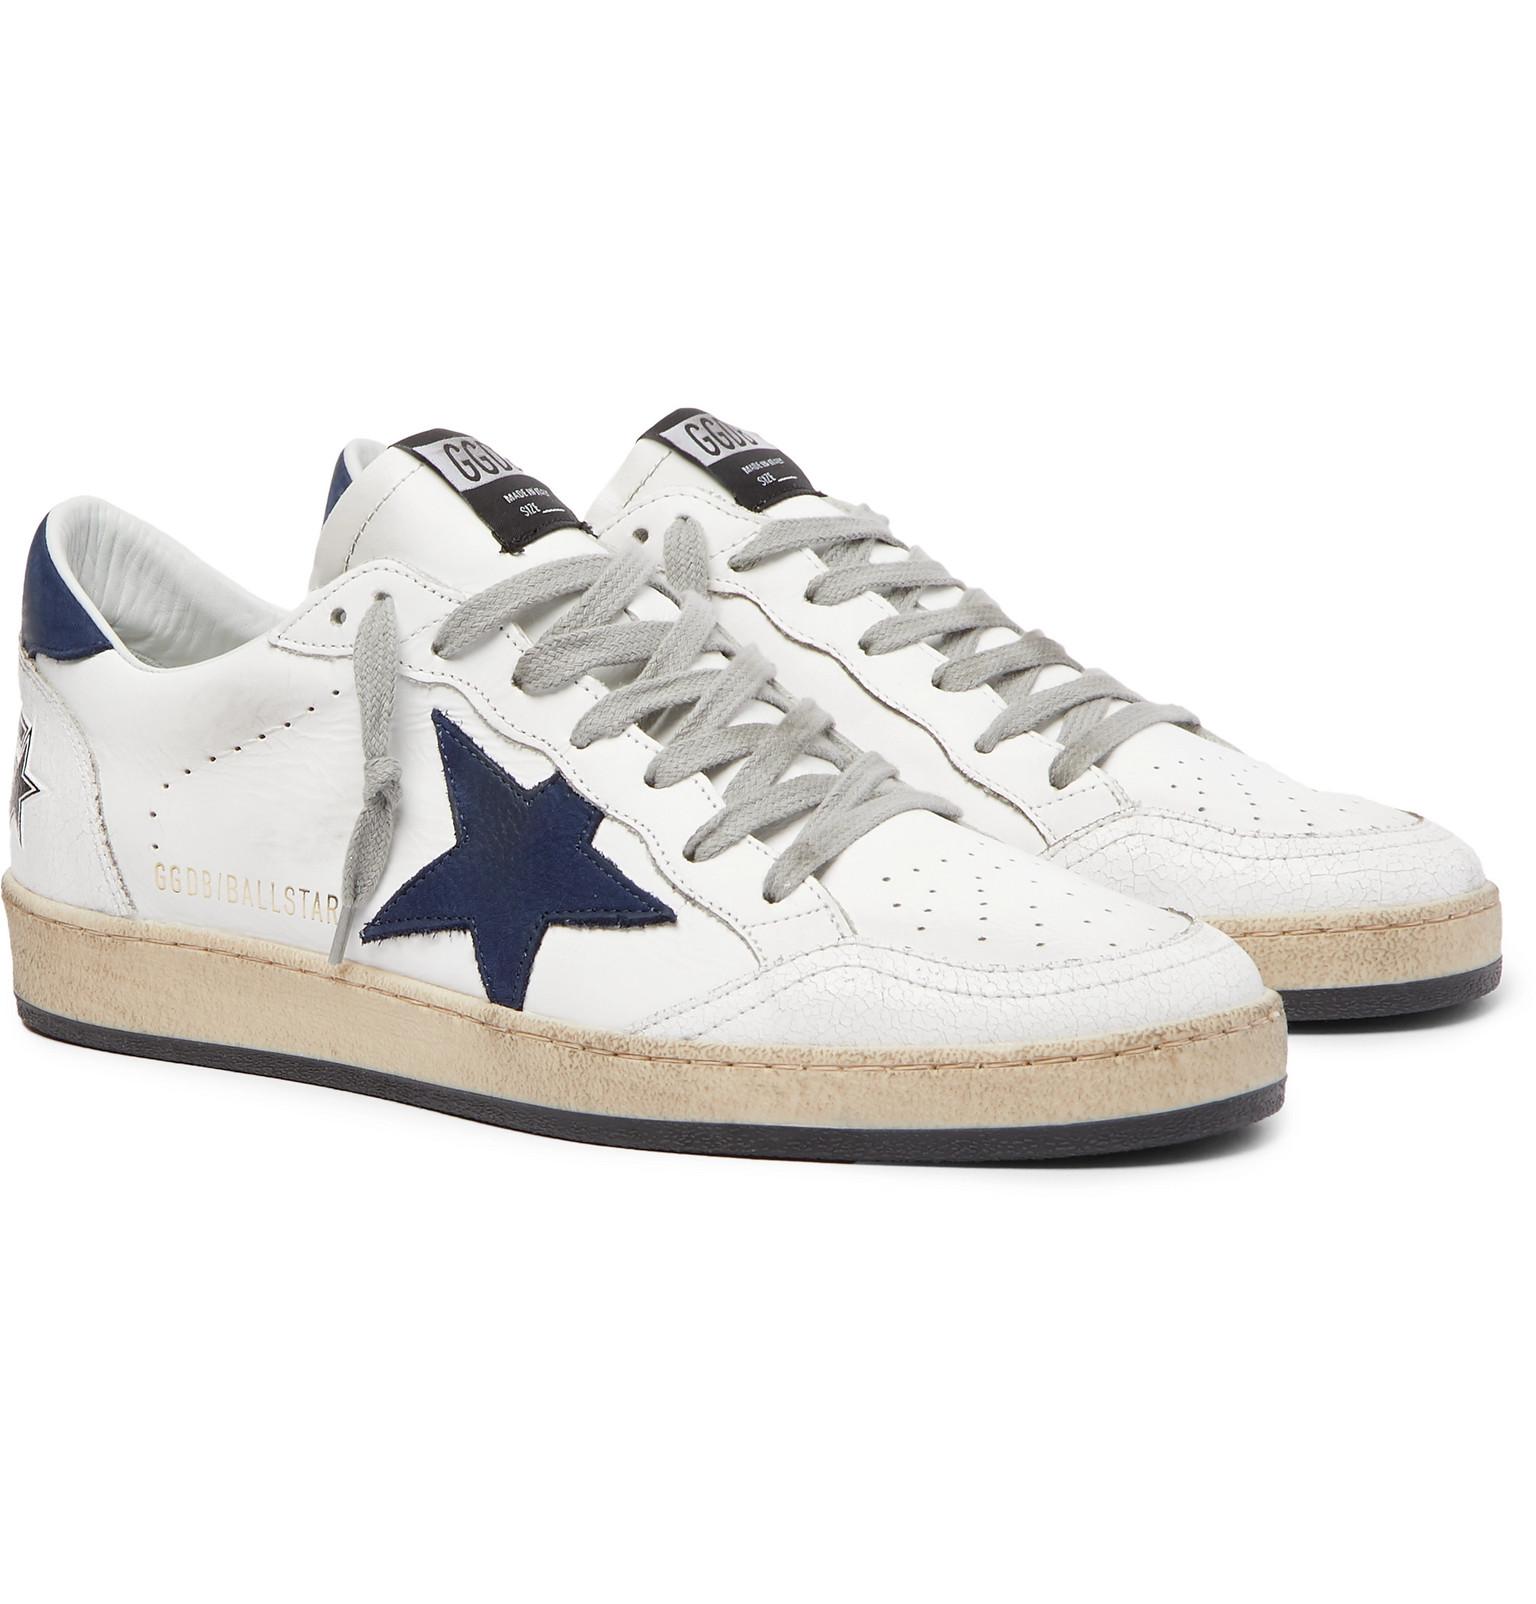 Golden Goose Deluxe Brand Ball Star Distressed Leather Sneakers in